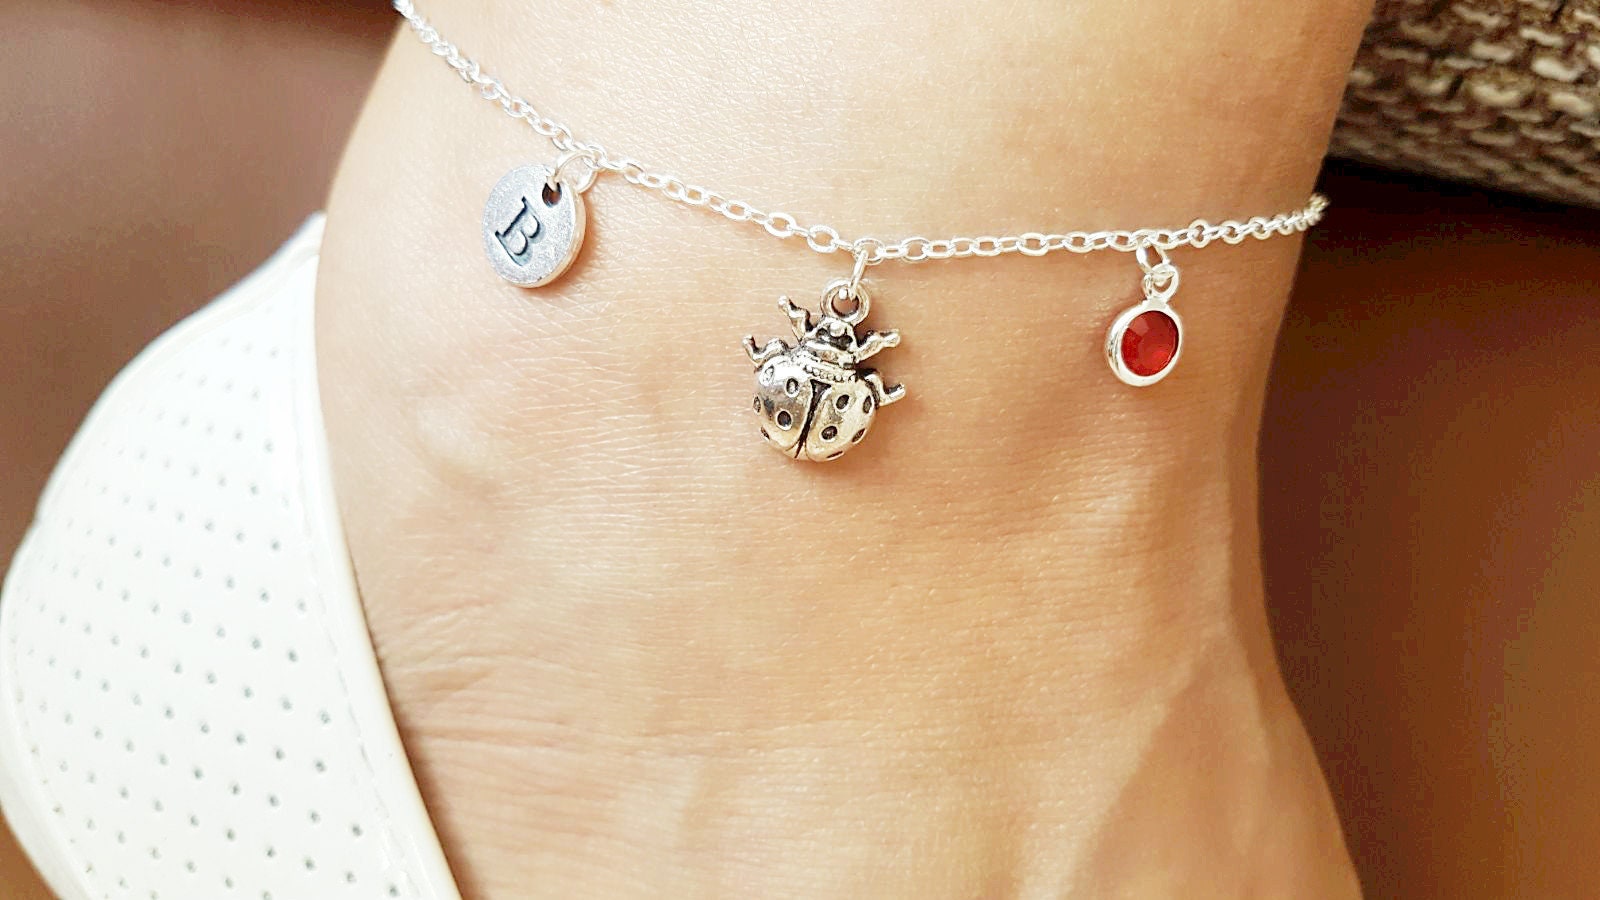 Ladybird anklet, Lady Bird Anklet for her, Ladybird Charm Anklet, Personalized Ladybug gift, Ladybird Charm, Silver Ladybird, Lady Bug, Girl